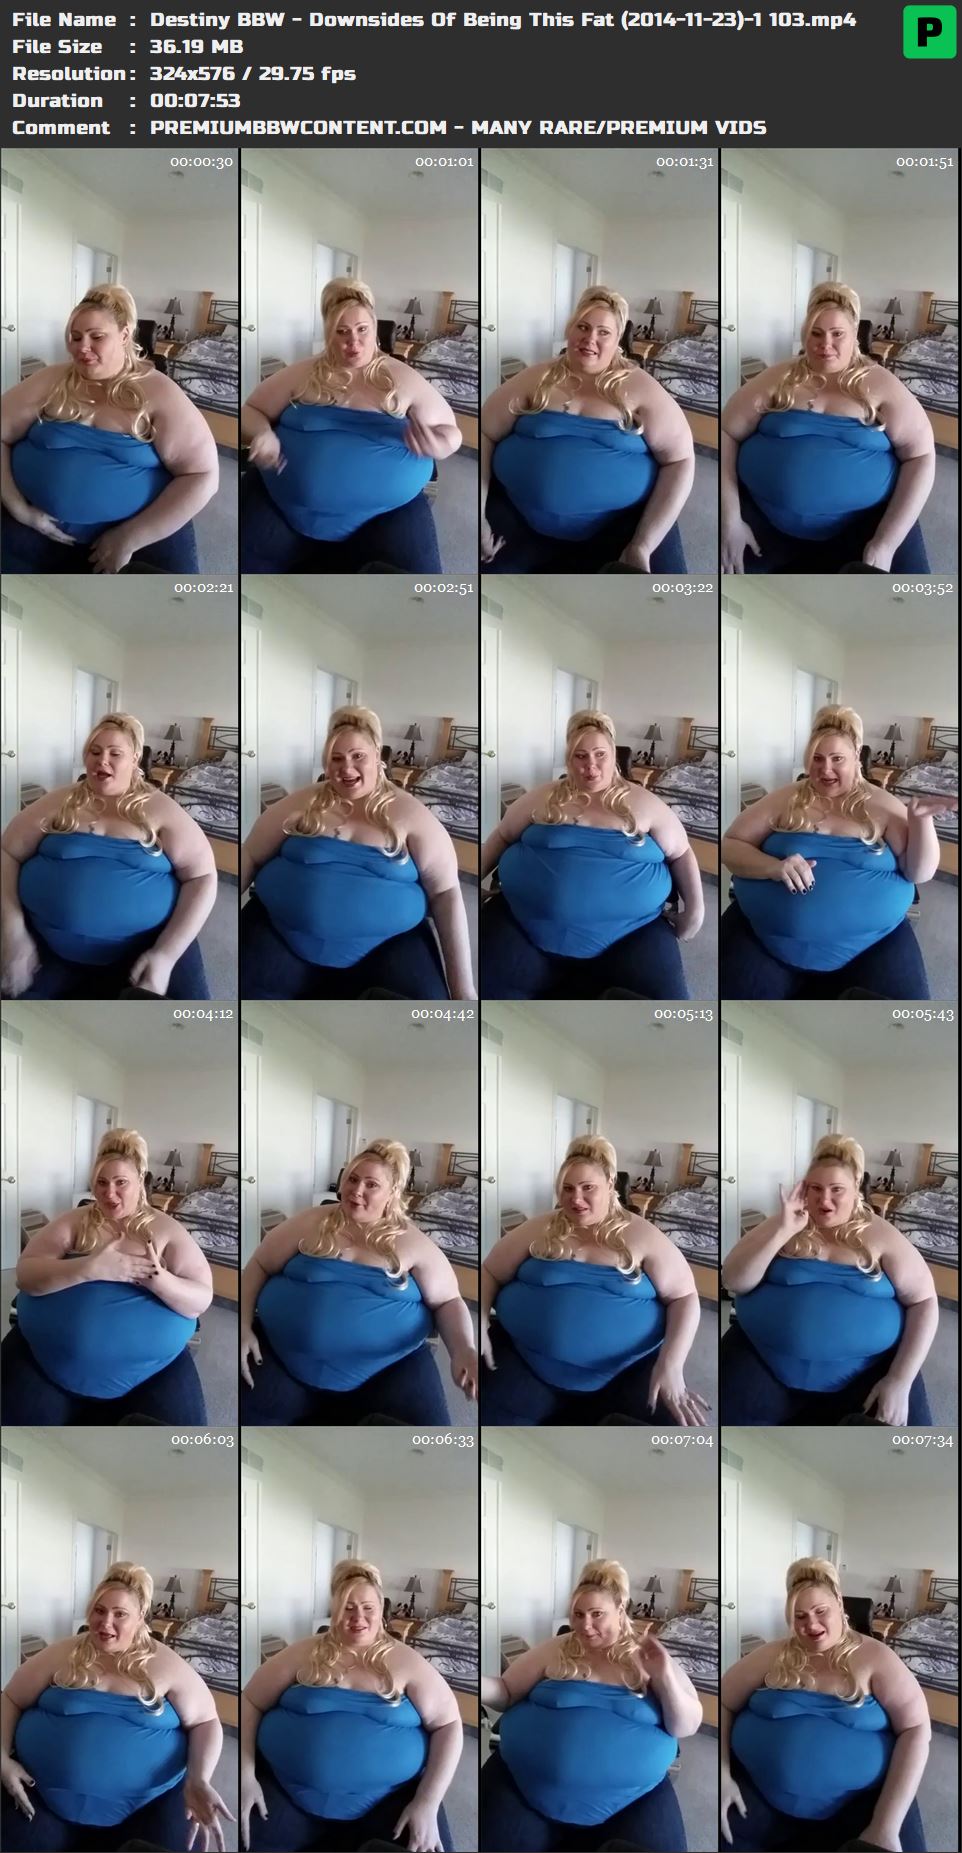 Destiny BBW - Downsides Of Being This Fat (2014-11-23)-1 103 thumbnails